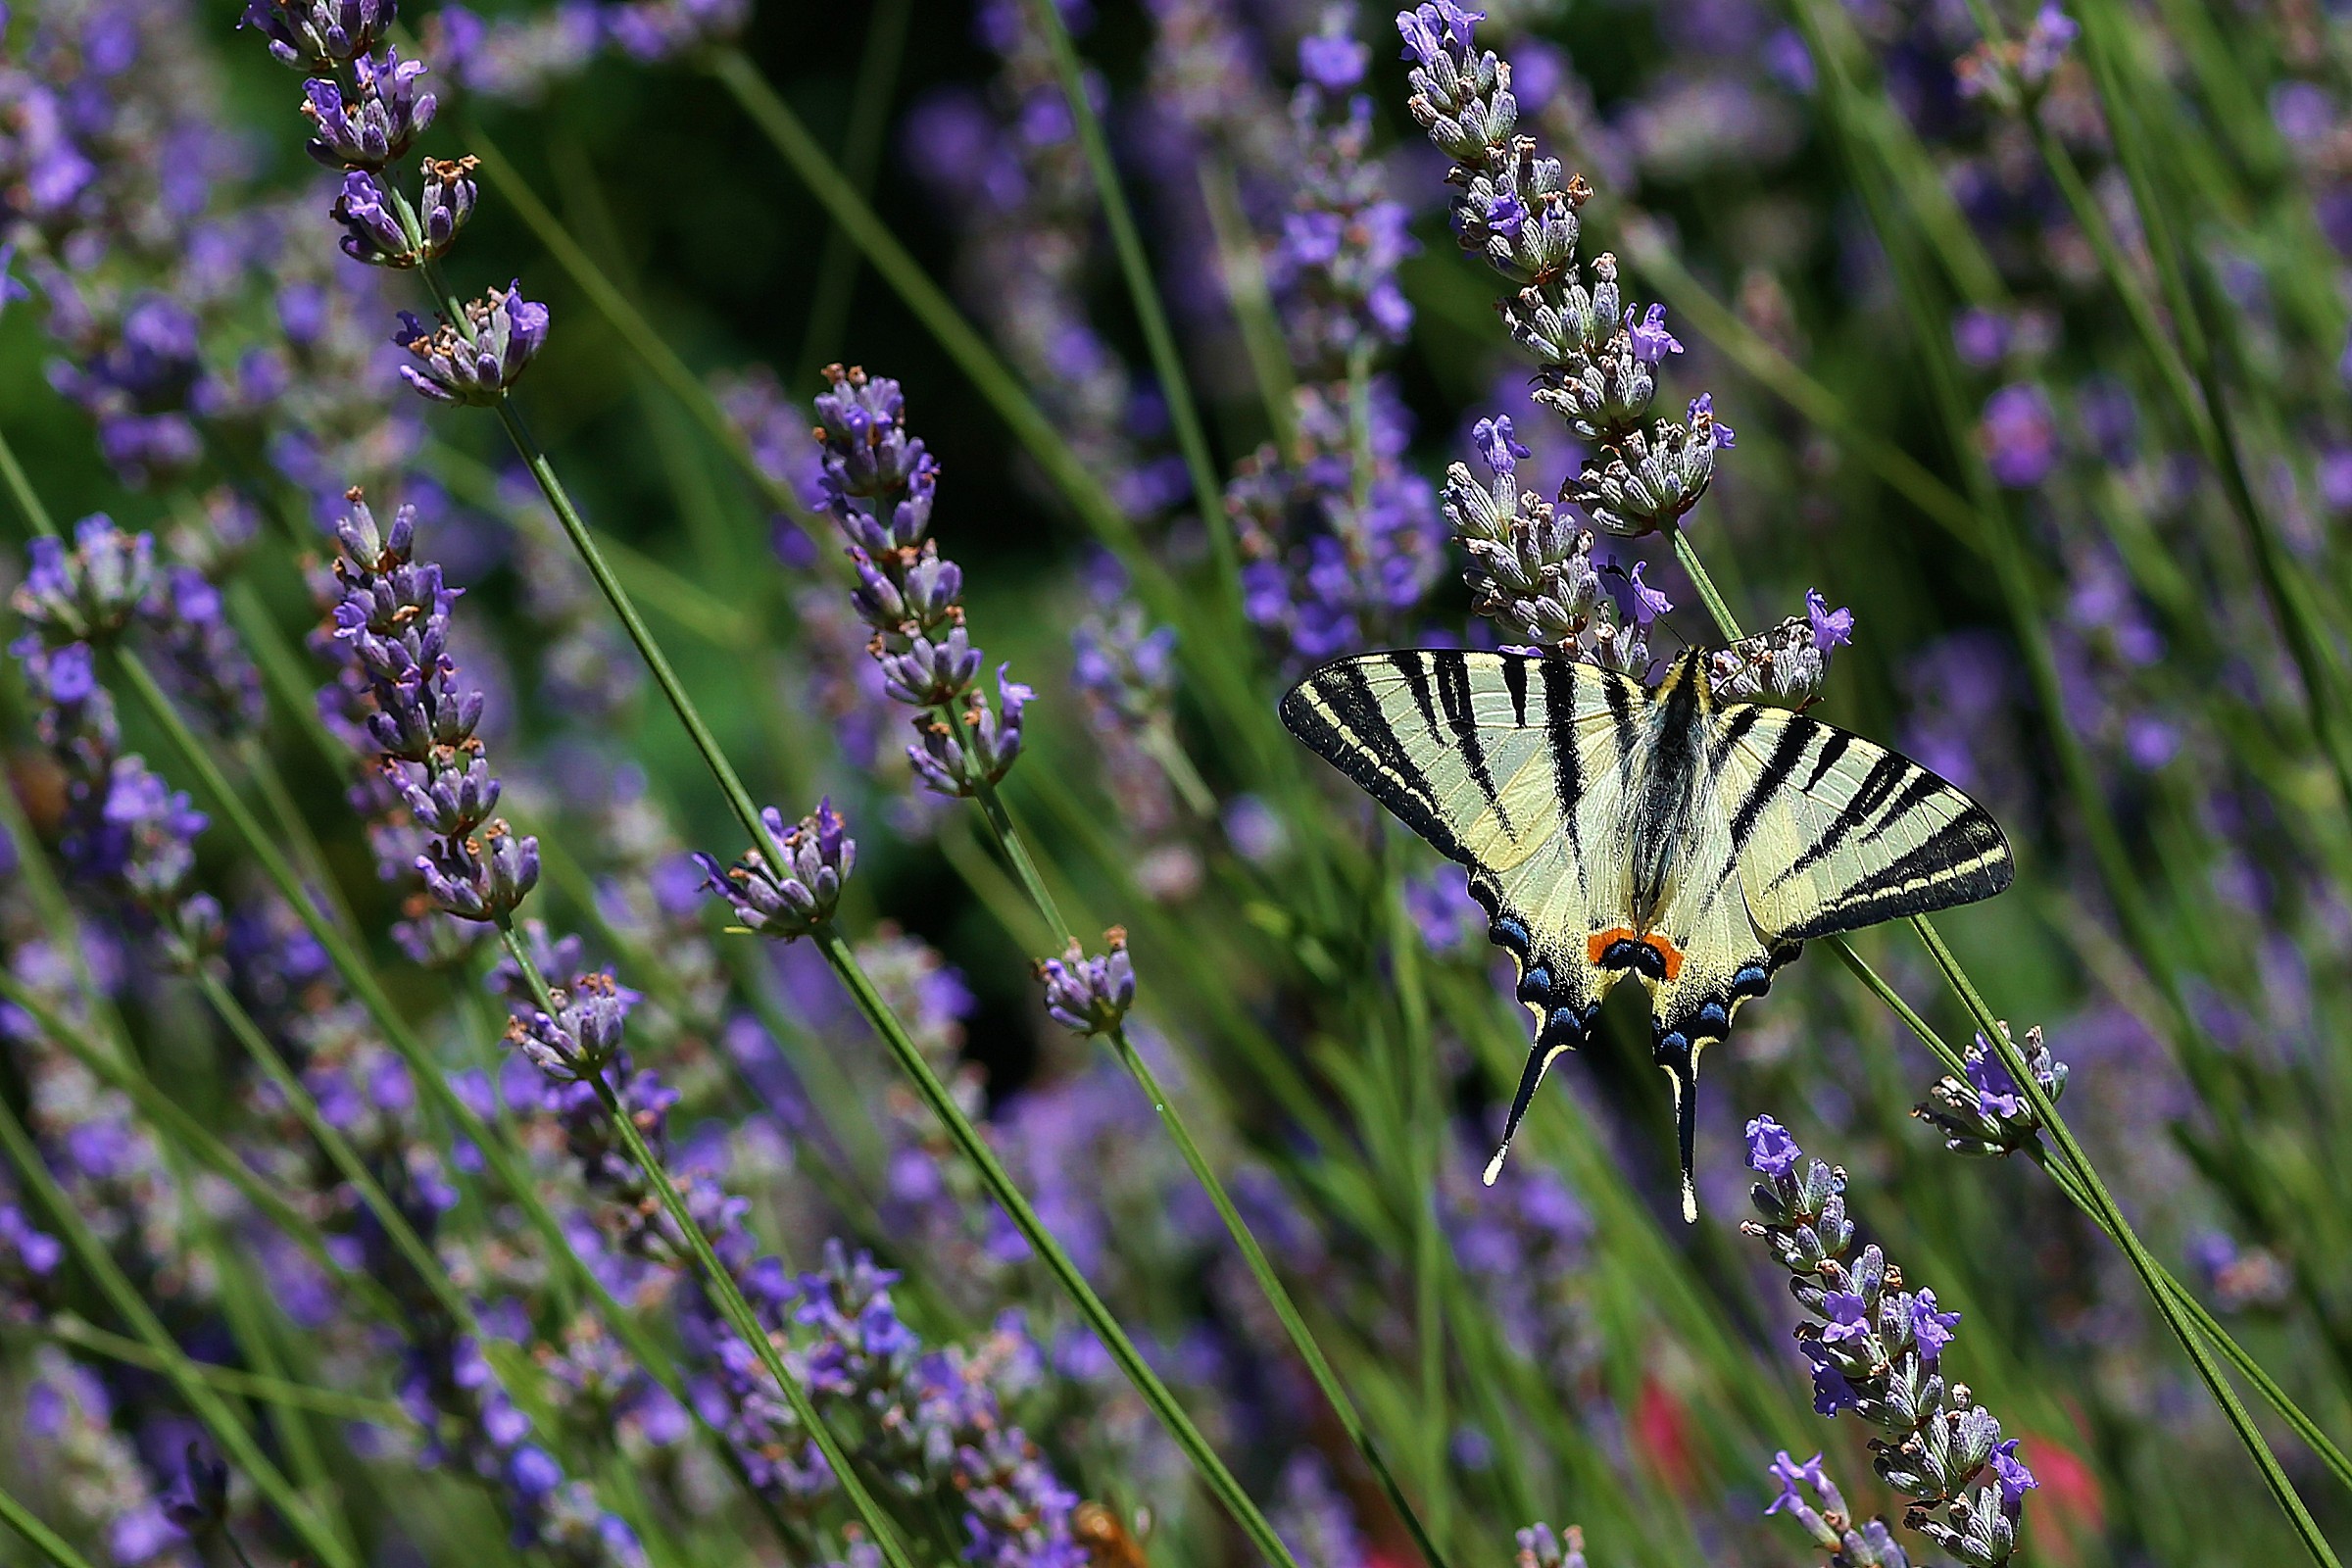 The swallowtail between the lavender...